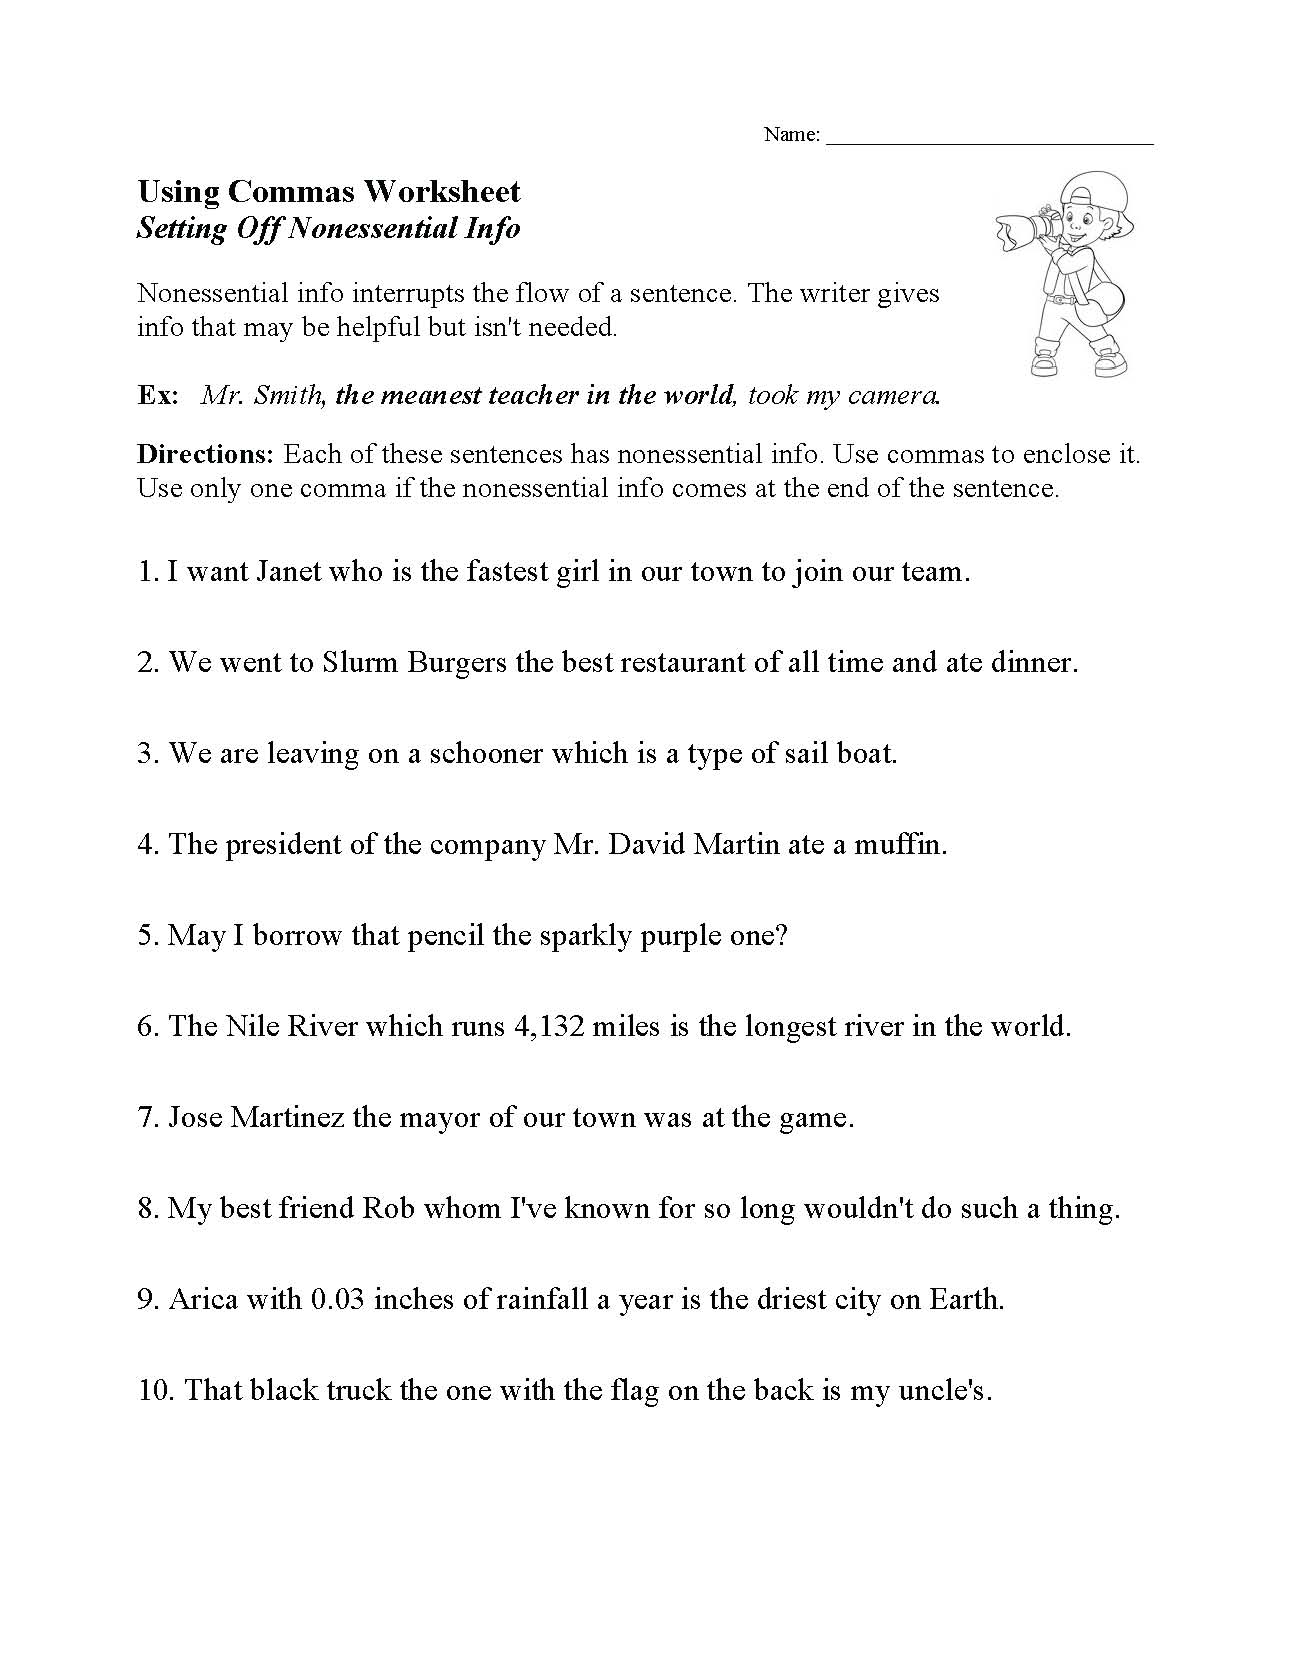 This is a preview image of our Using Commas to Set Off Information Worksheet. Click on it to enlarge this image and view the source file.